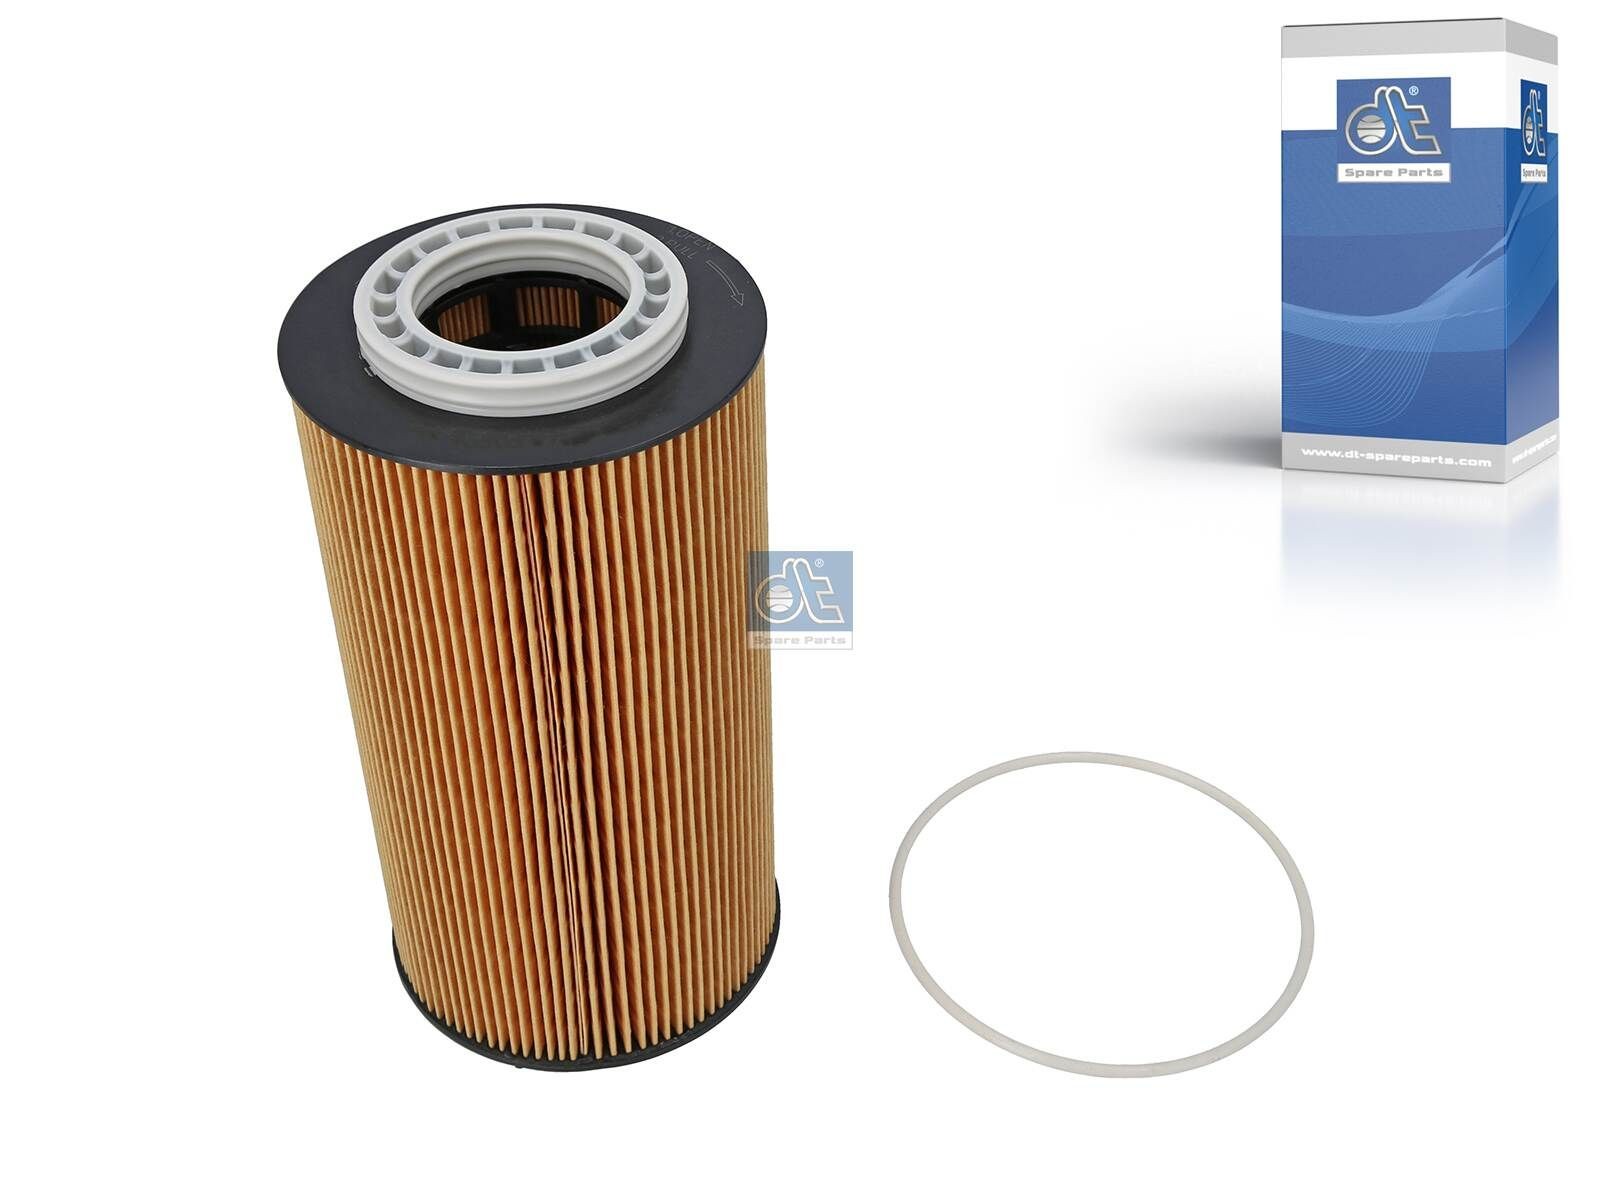 F 026 407 201 DT Spare Parts with seal ring, Filter Insert Oil filters 3.18611 buy